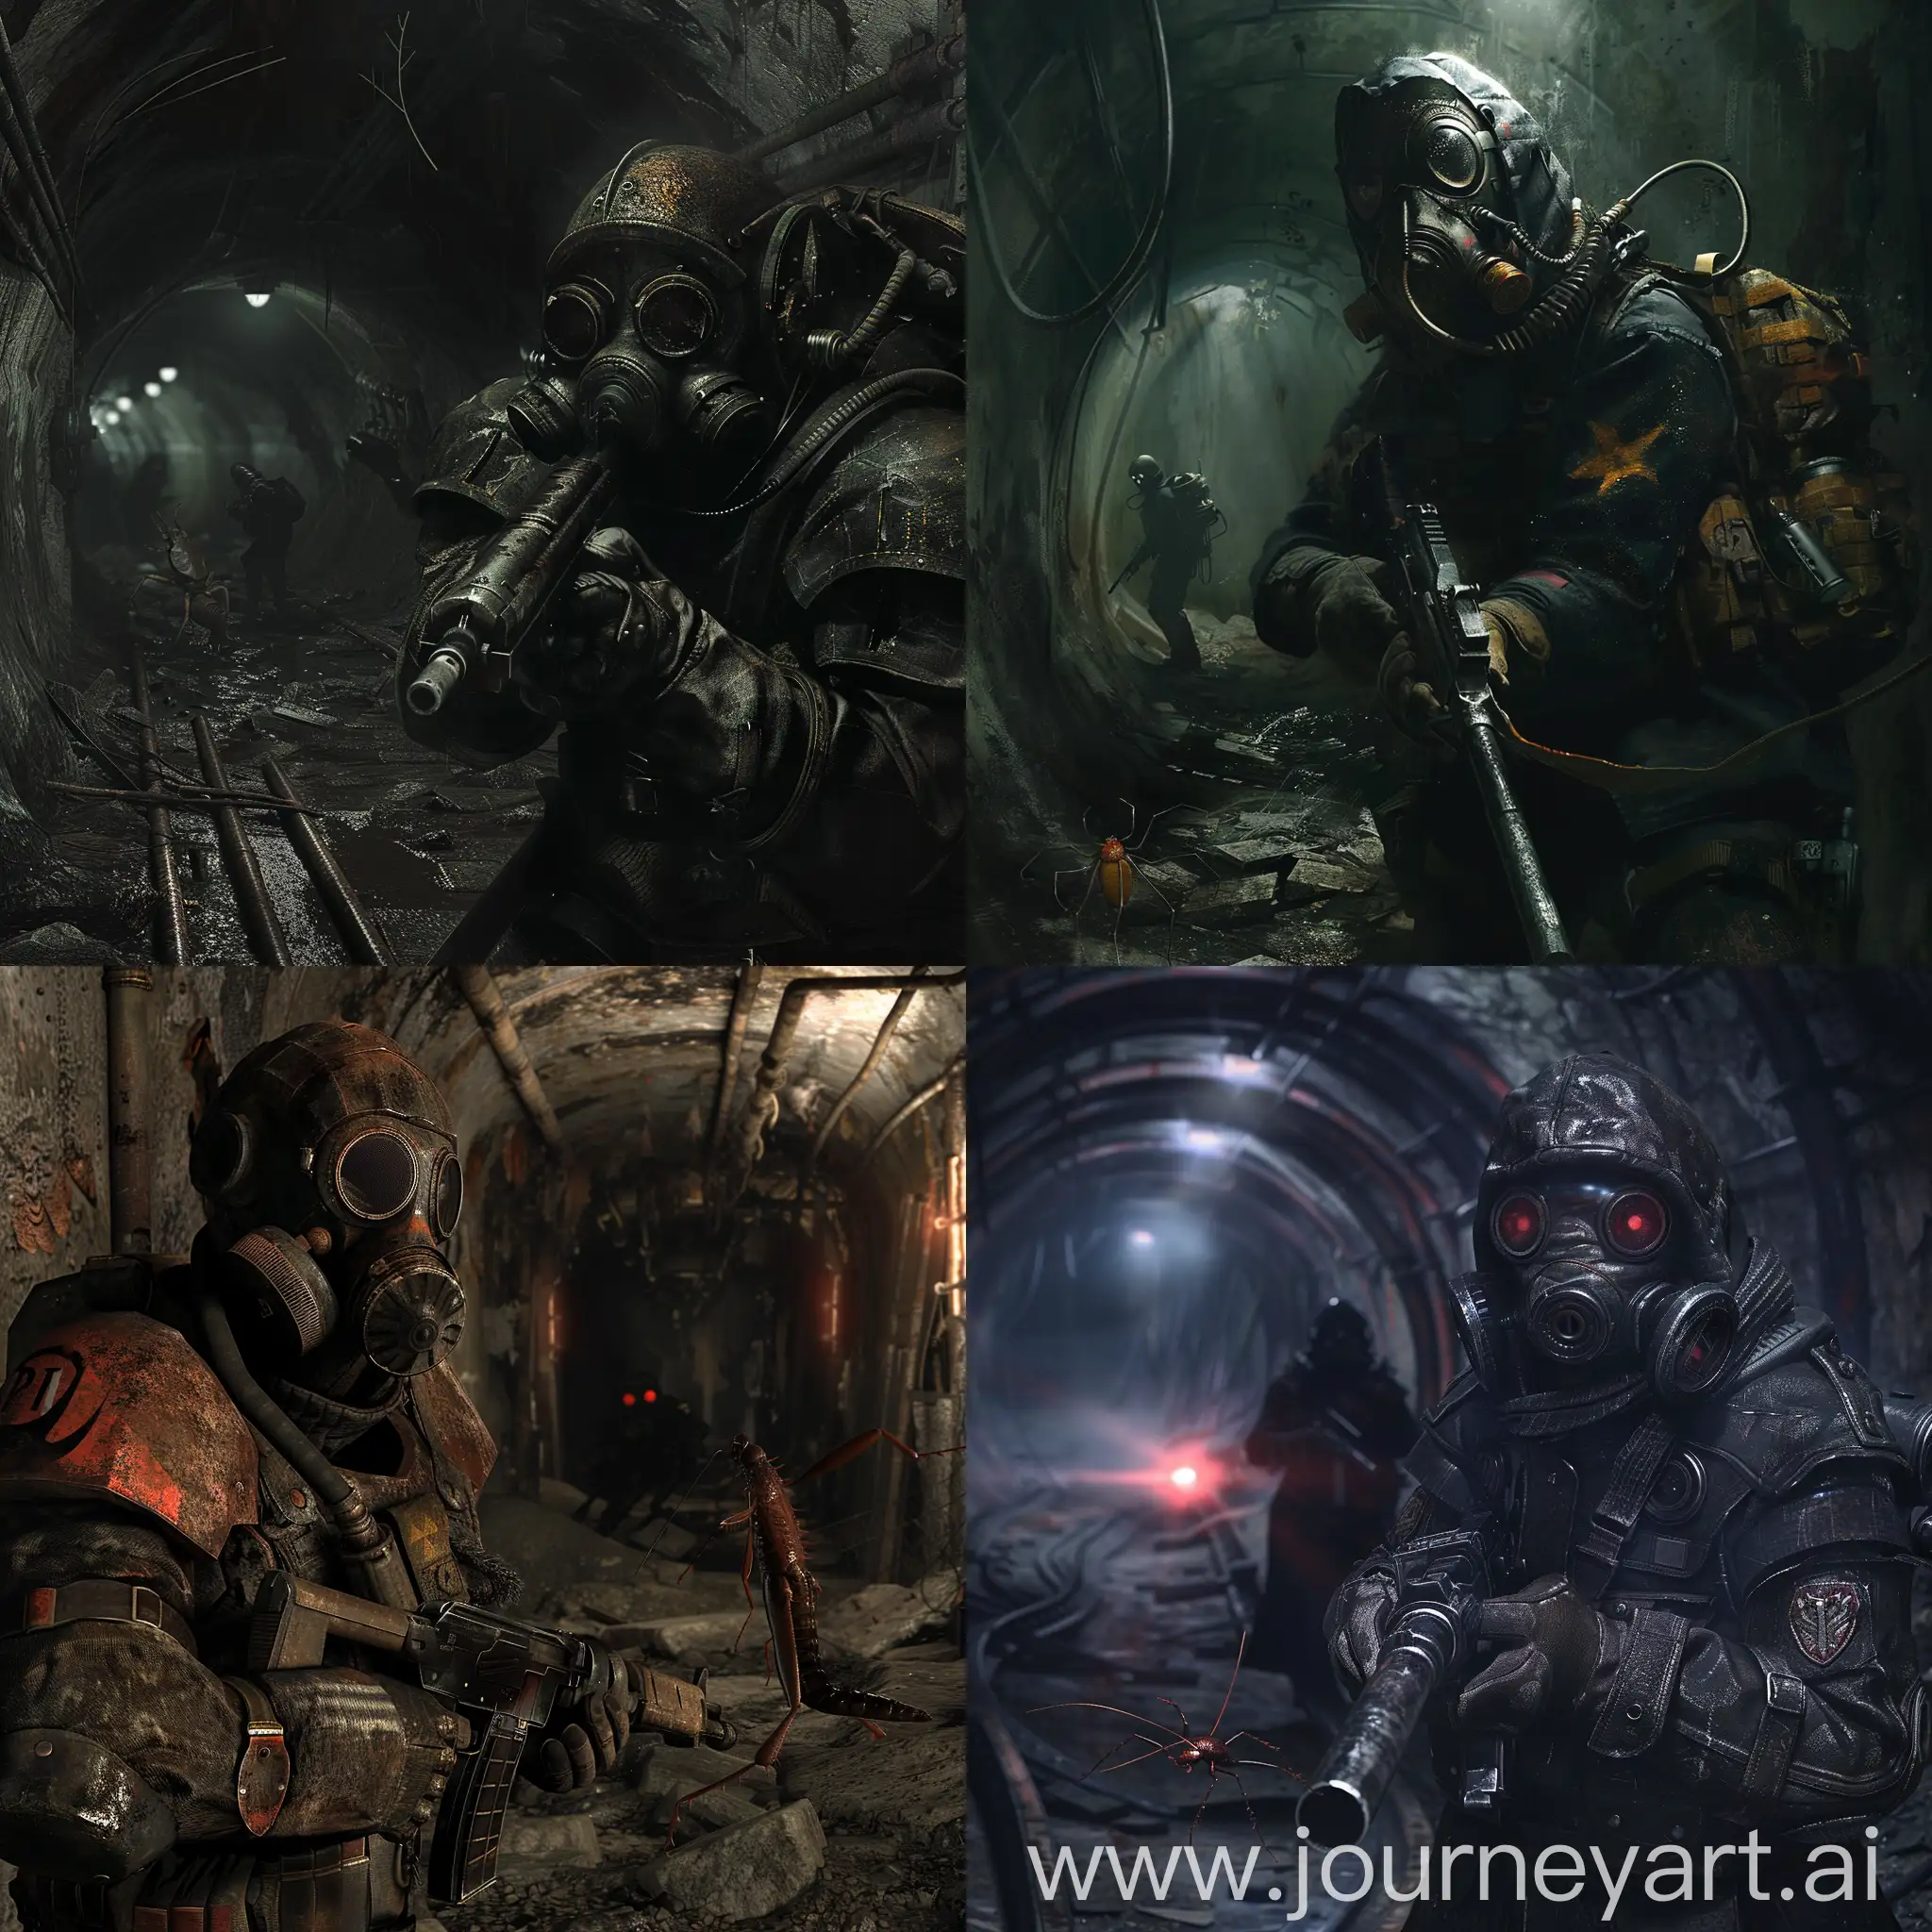 Metro 2033, survivor stand in post-apocalyptic armor and gasmask in a dirty and abandoned catacombs, he hold an old Soviet PM pistol with both hands, I pointed the muzzle at a mutant tick the size of a dog, a cockroach stands in the dark and also looks at him, lack of light sources, darkness, despondency, tension.